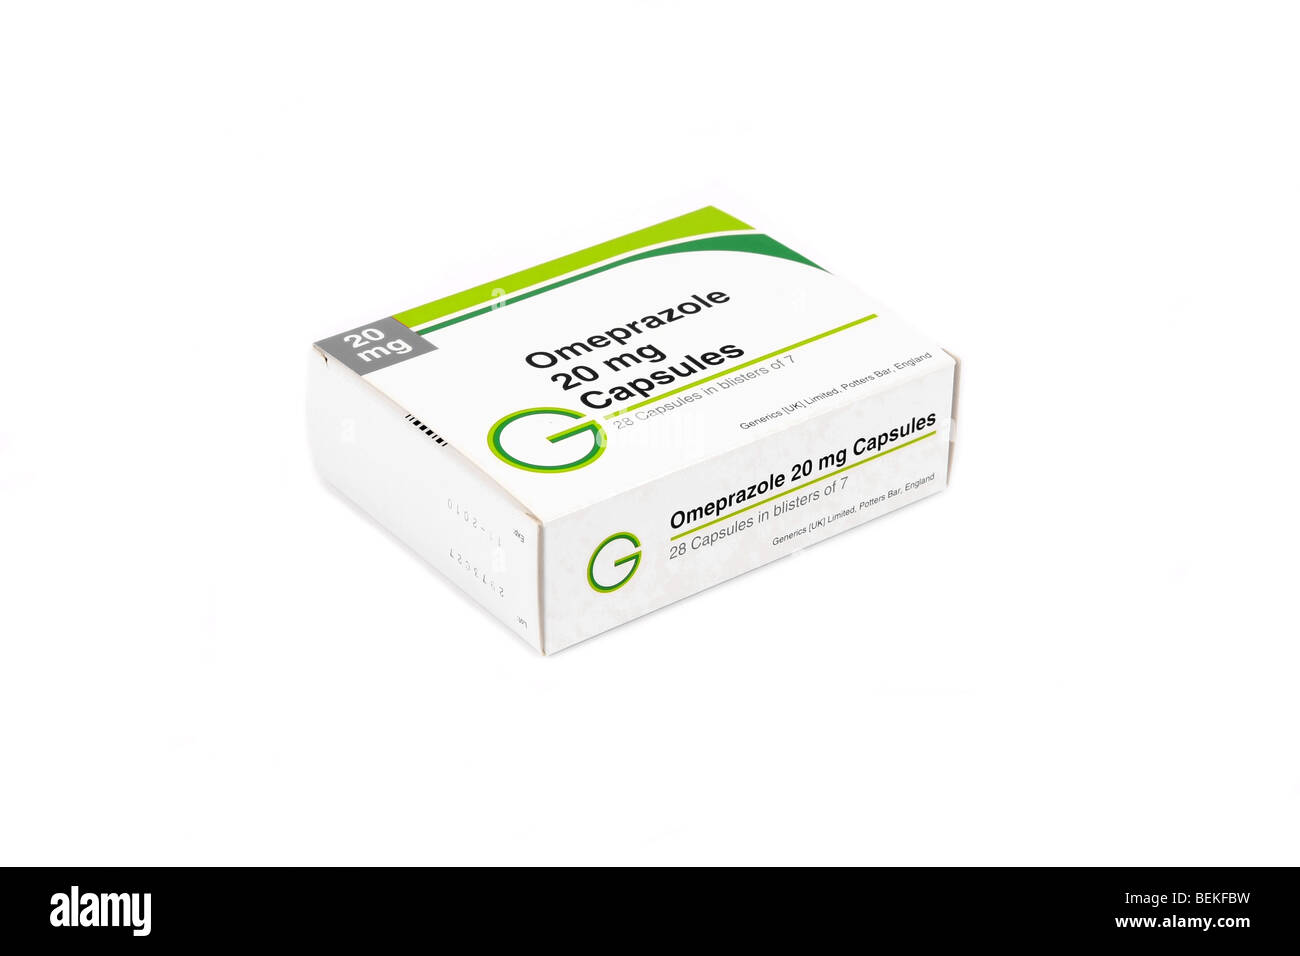 Box of Omeprazole Gastro-Resistant Capsules used to treat Ulcers Stock Photo